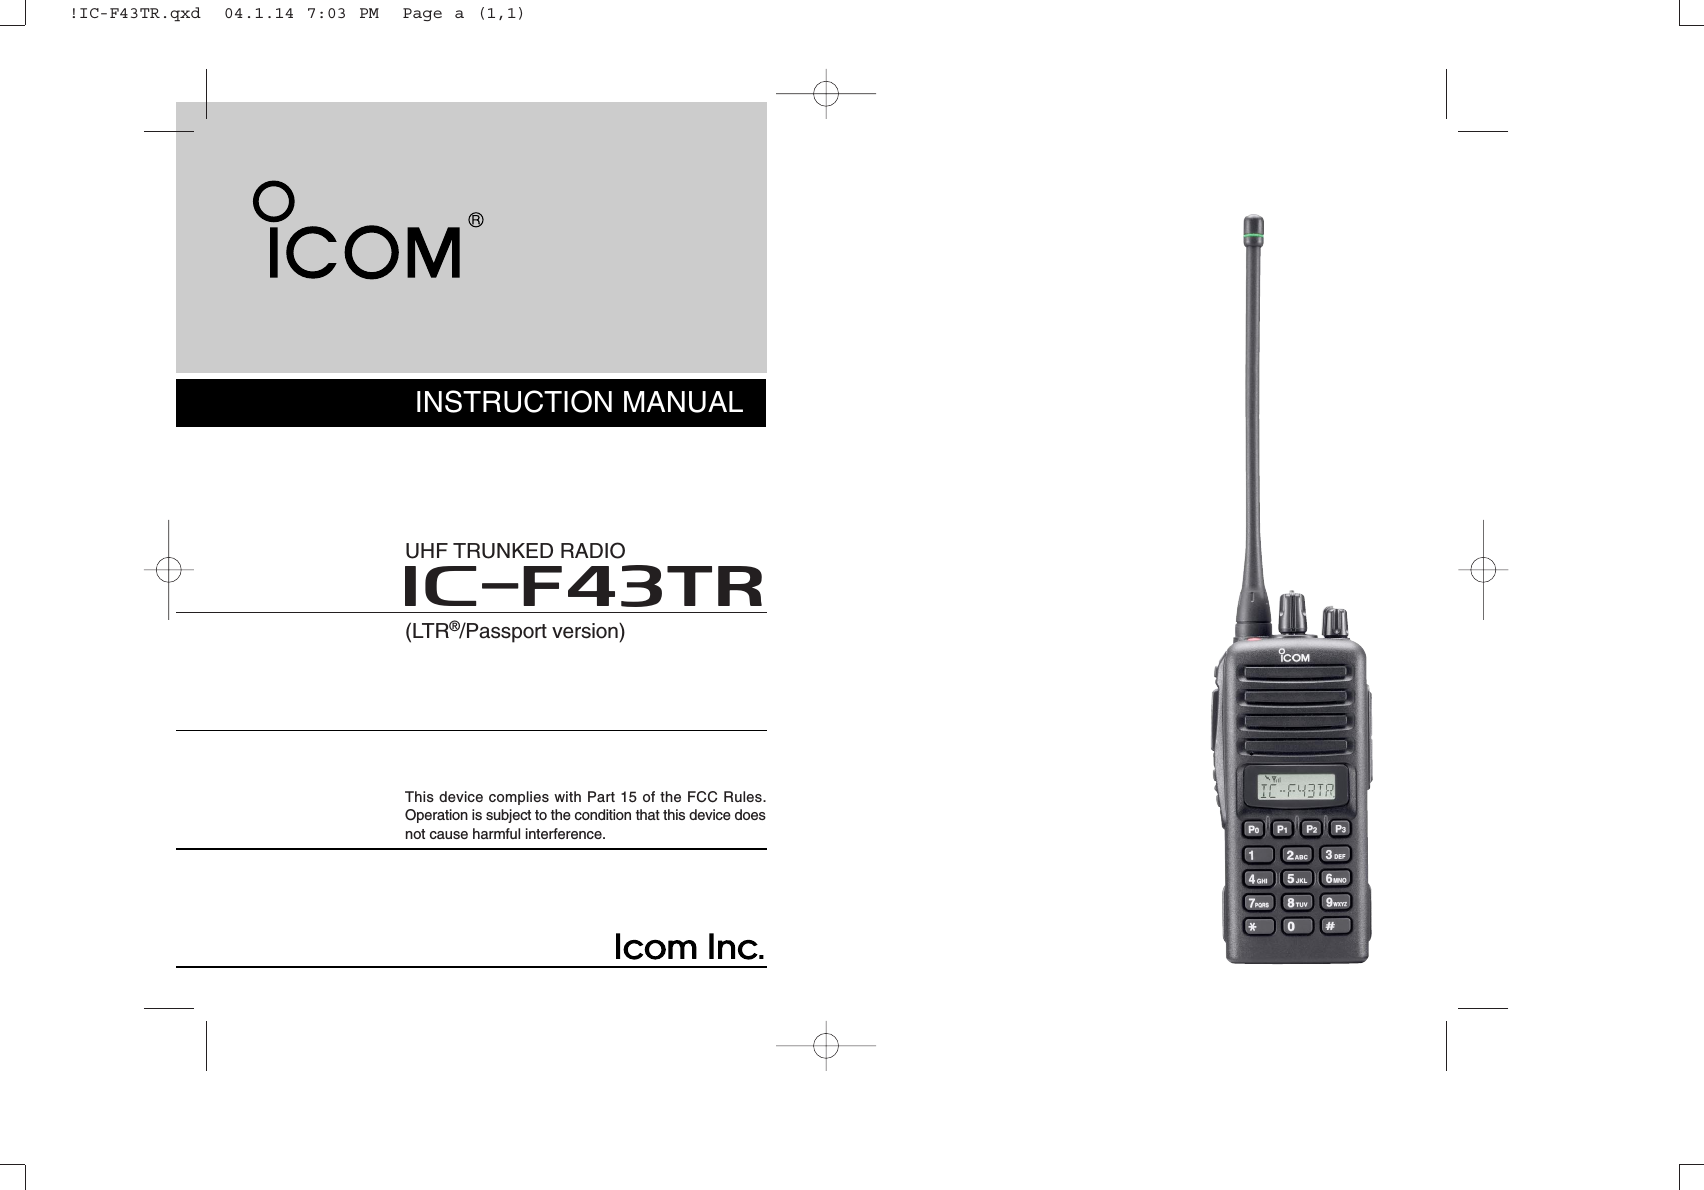 INSTRUCTION MANUALiF43TRUHF TRUNKED RADIO(LTR®/Passport version)This device complies with Part 15 of the FCC Rules.Operation is subject to the condition that this device doesnot cause harmful interference.!IC-F43TR.qxd  04.1.14 7:03 PM  Page a (1,1)